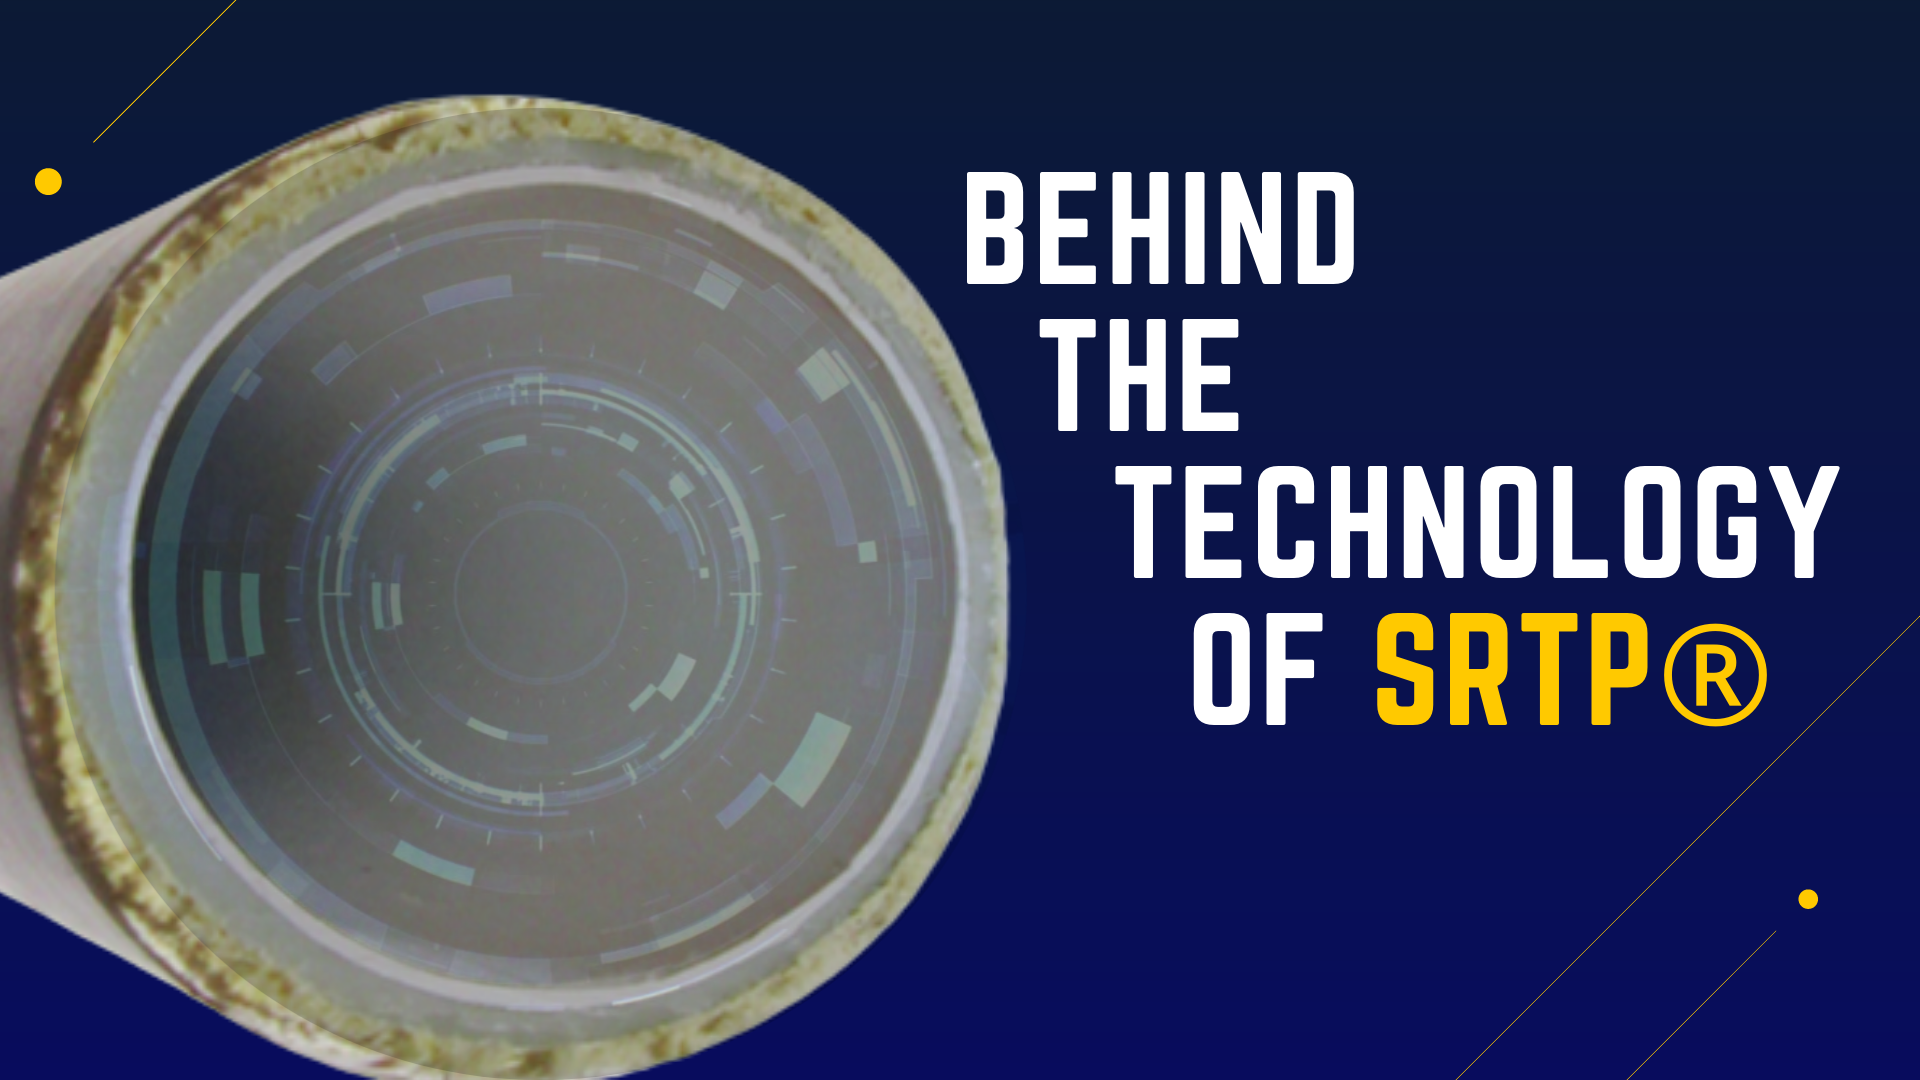 Behind the Technology of SRTP®